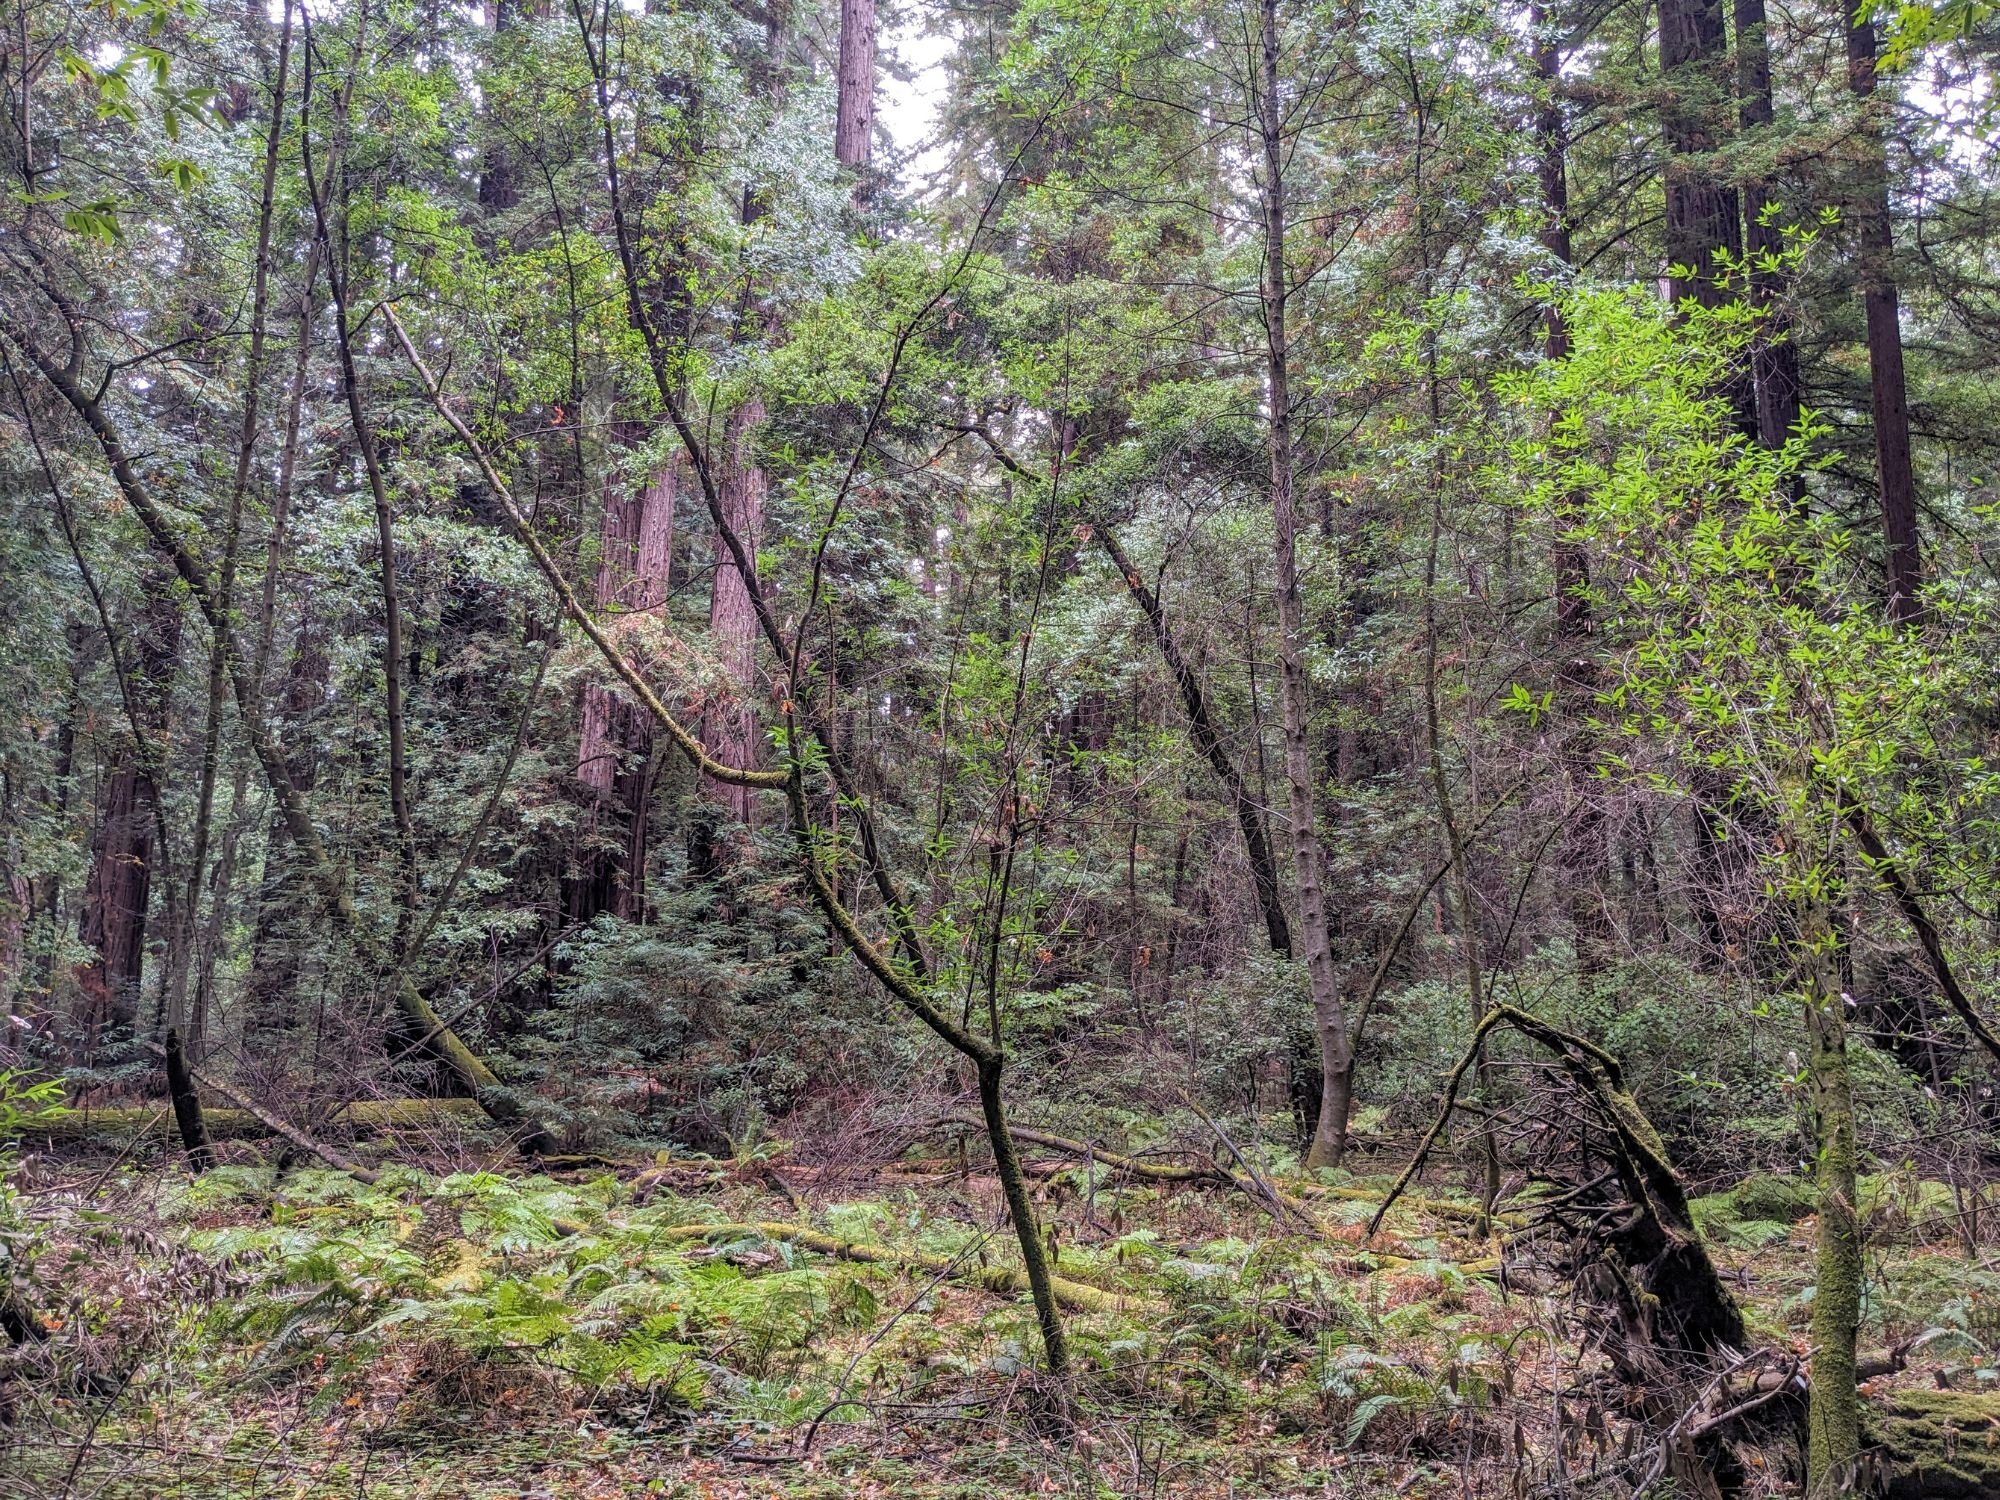 A view of the lower forest canopy and floor in a redwood forest.